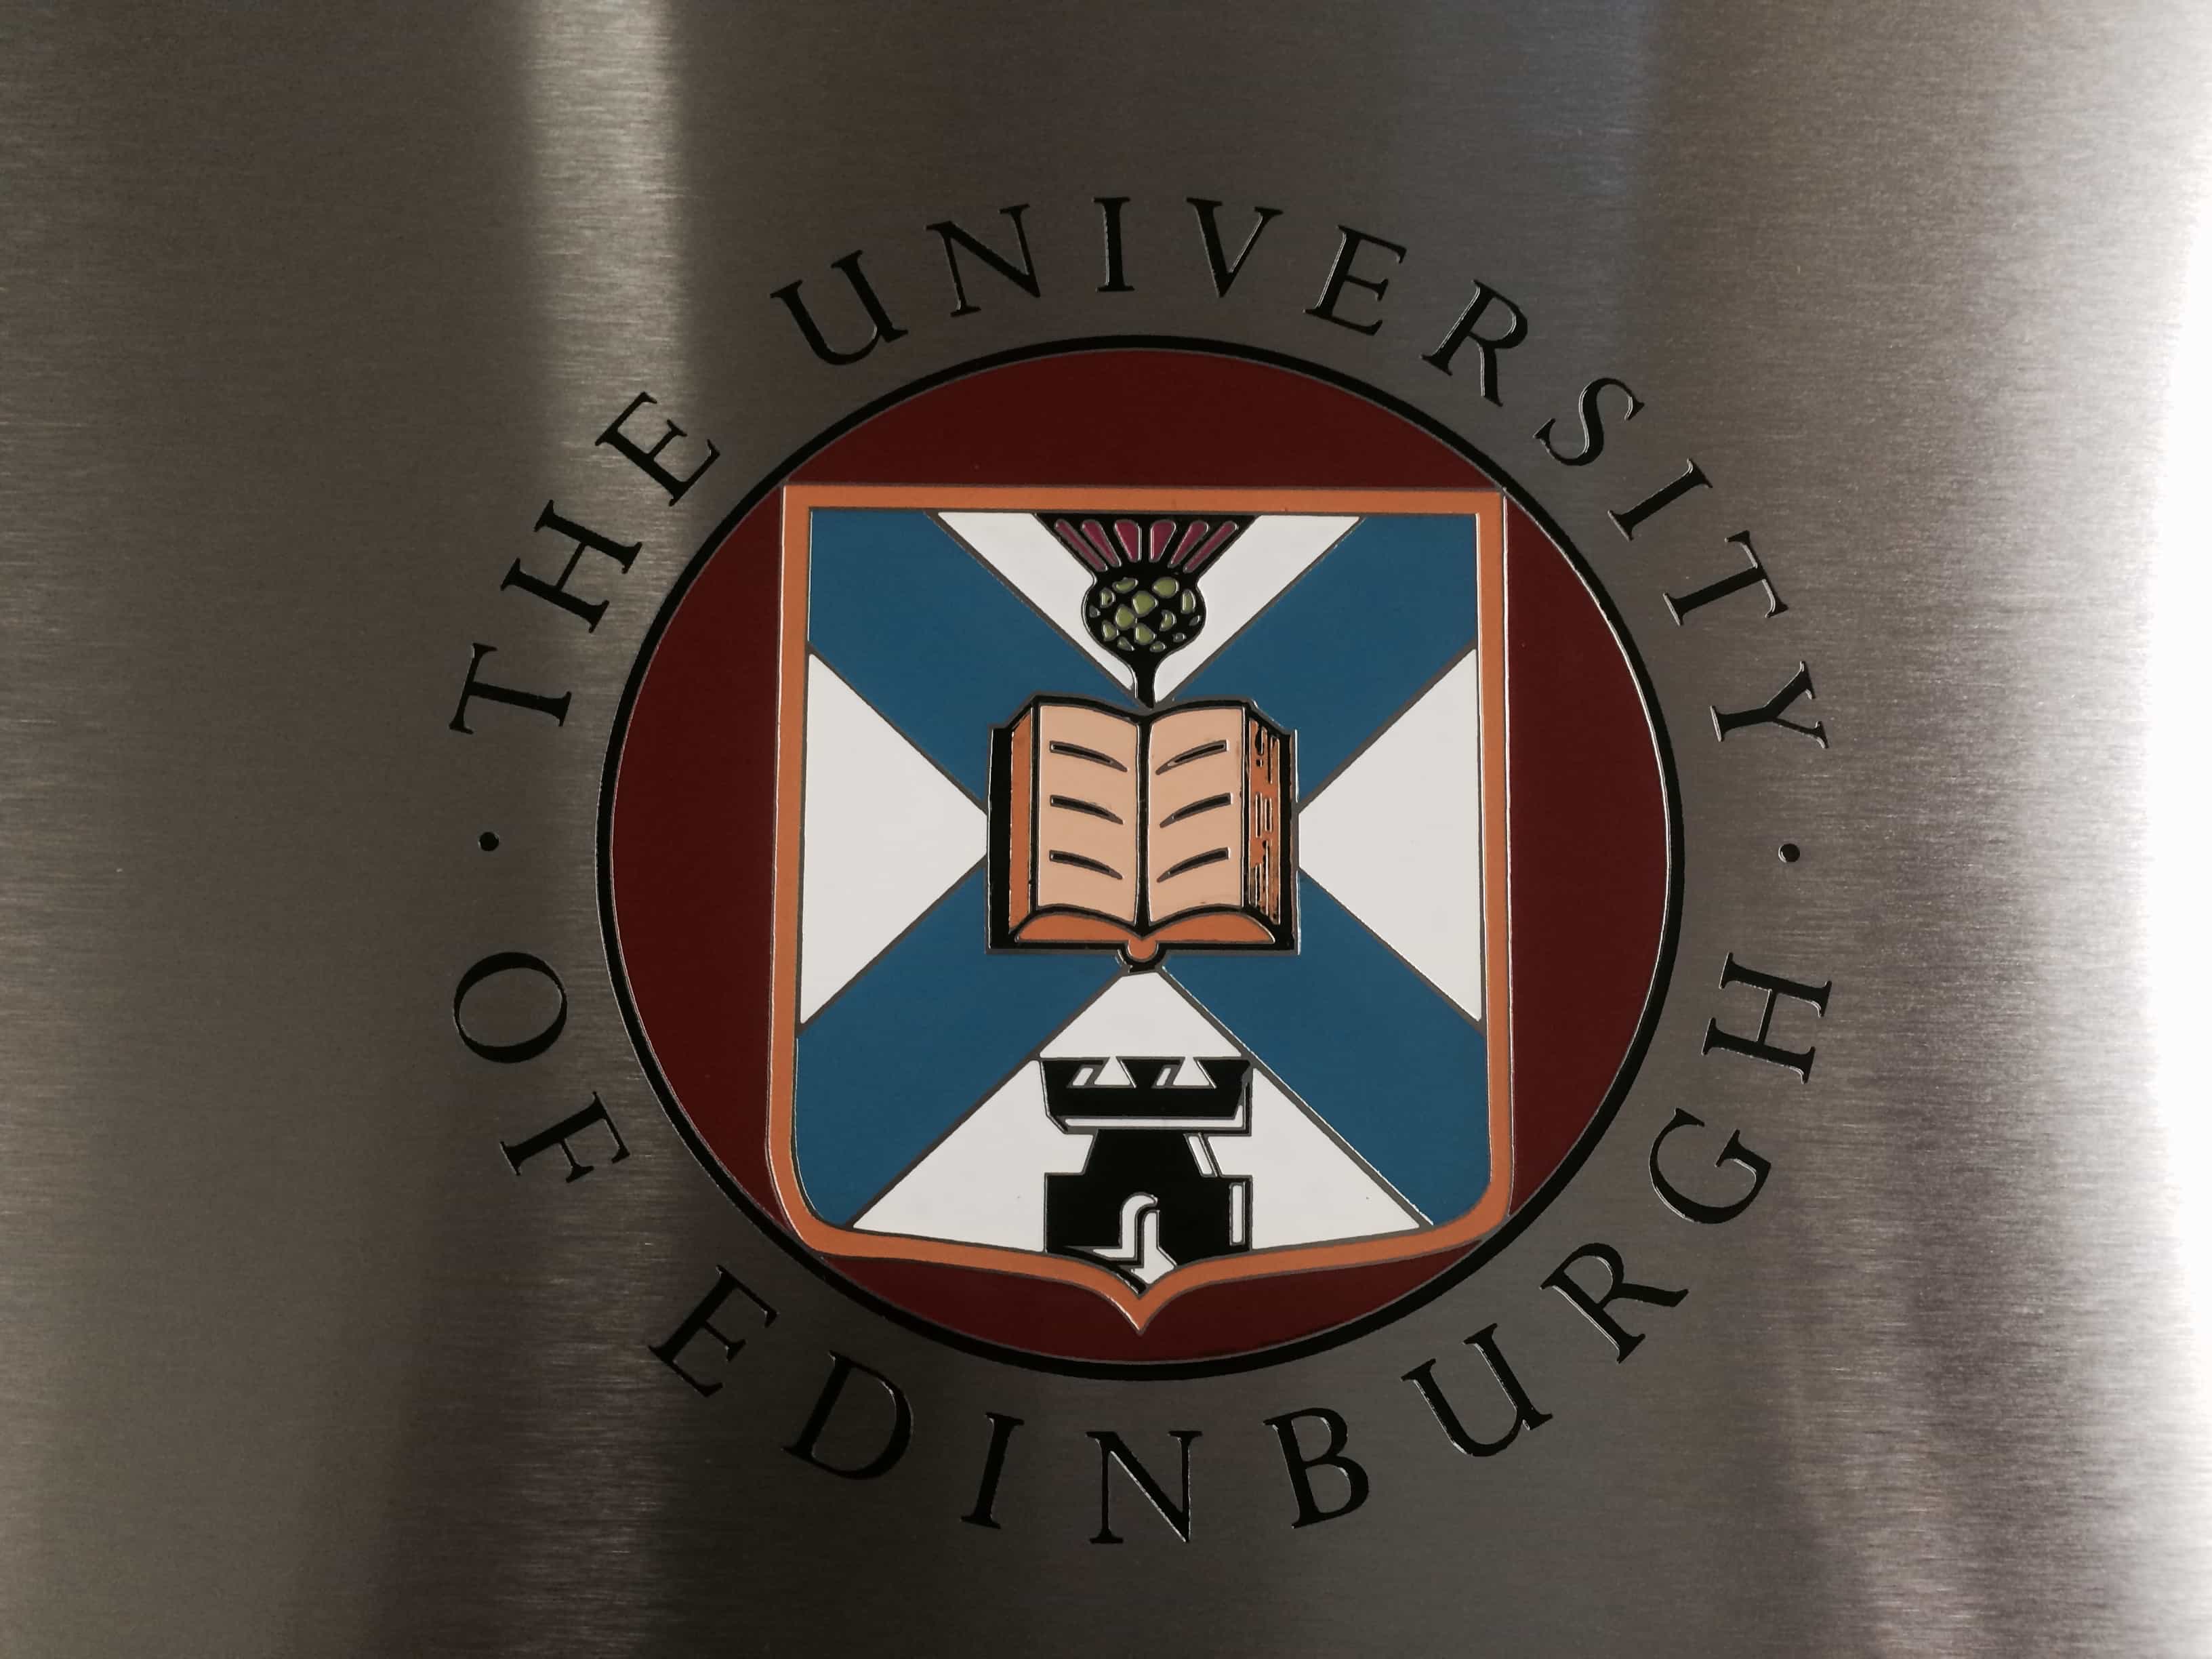 Edinburgh University Plaque – Chemically Etched Stainless Steel panel with Multi Colour Intricate Infill